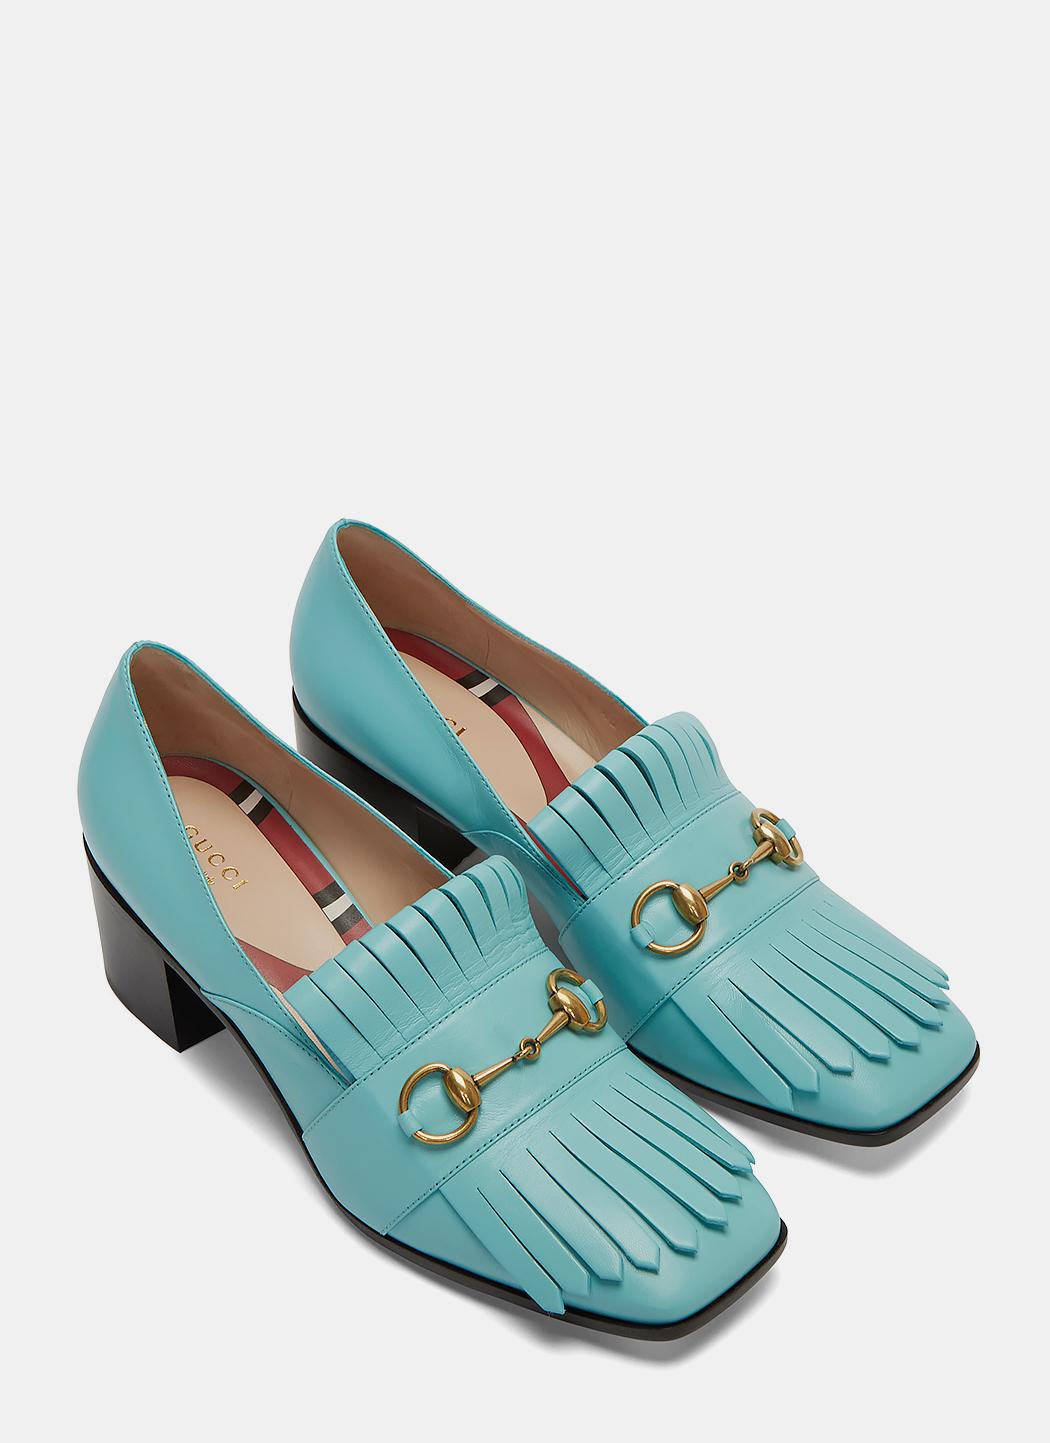 Lyst - Gucci Women&#39;s Heeled Horsebit Loafers In Turquoise in Blue